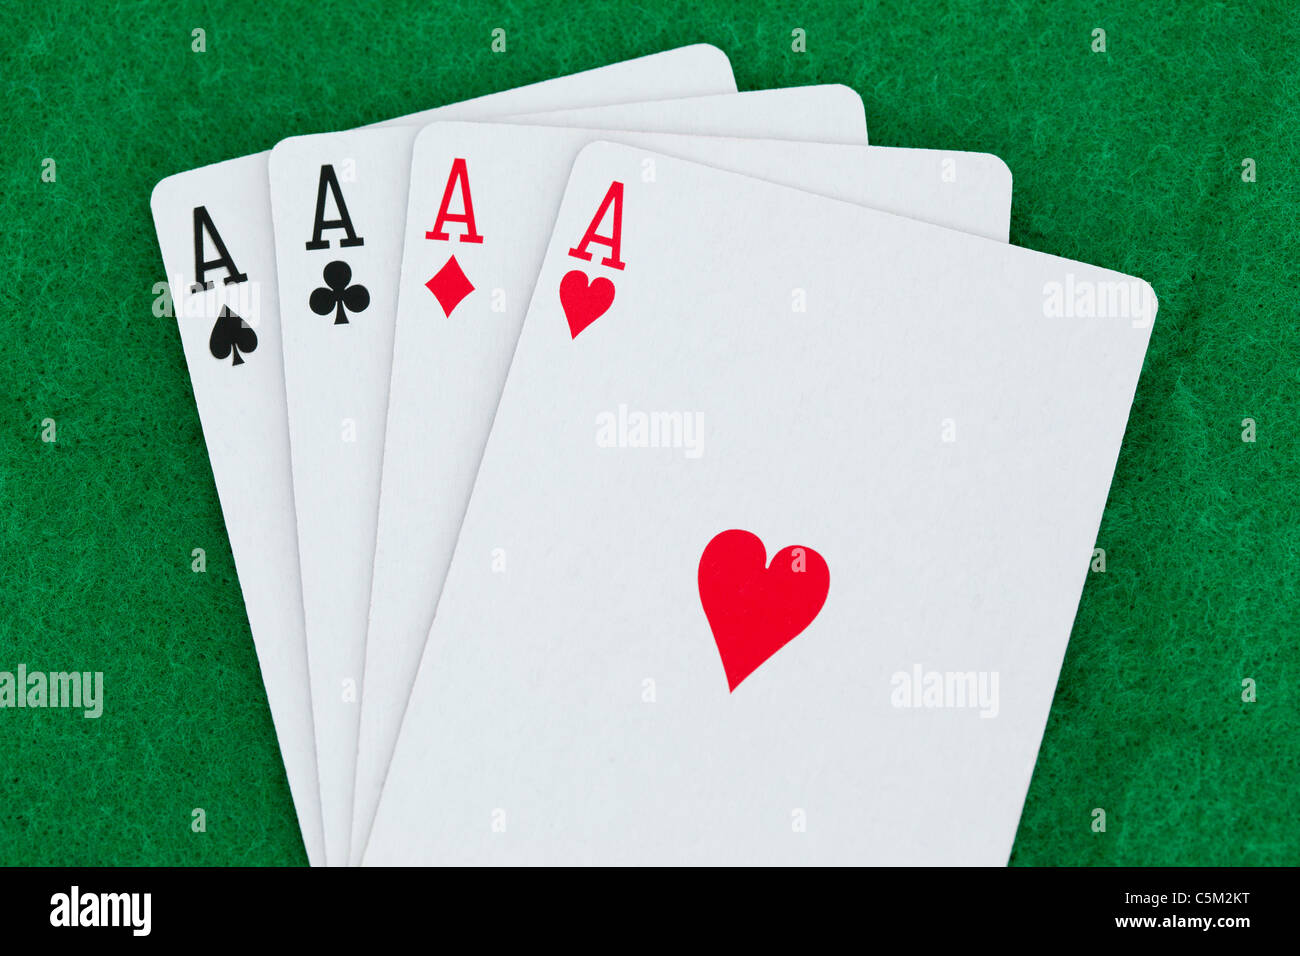 Playing cards on a green surface Stock Photo